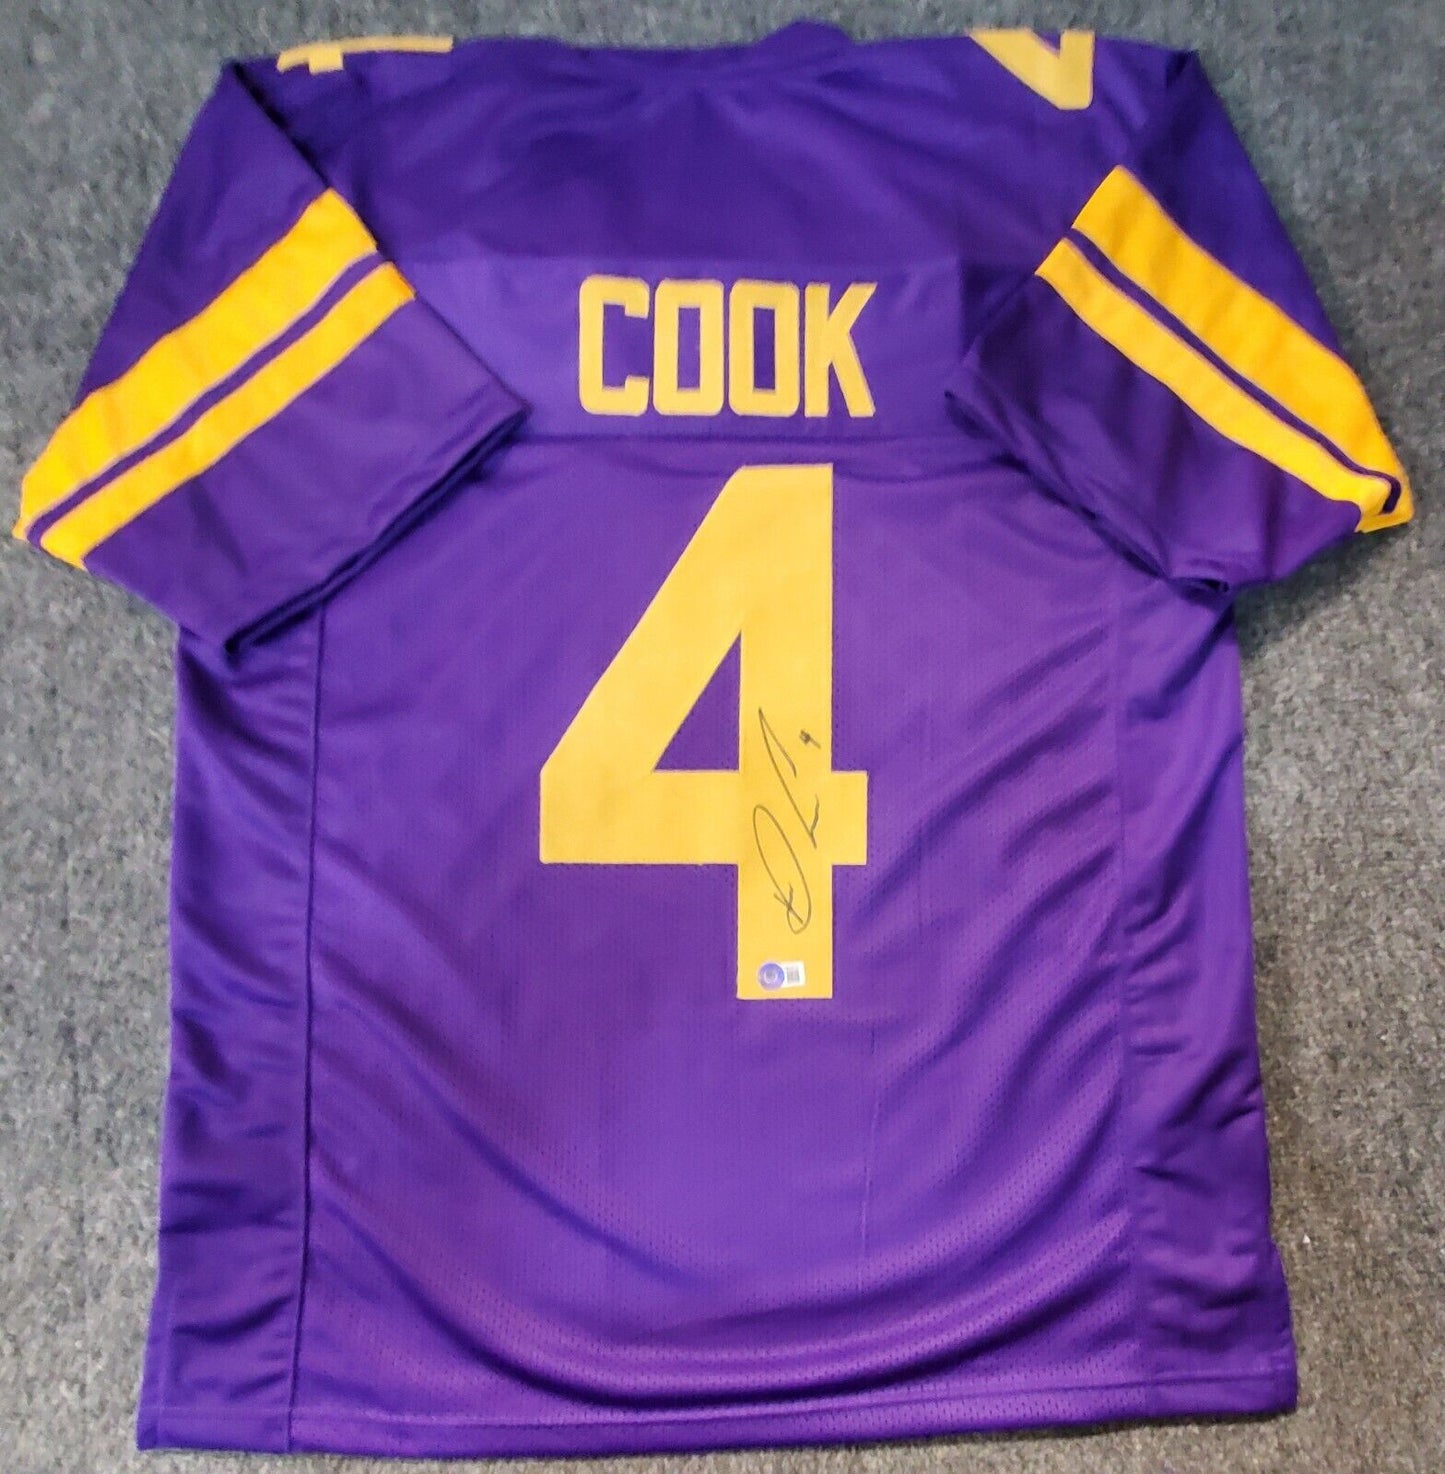 MVP Authentics Dalvin Cook Minnesota Vikings Autographed Signed Jersey Beckett Holo 175.50 sports jersey framing , jersey framing